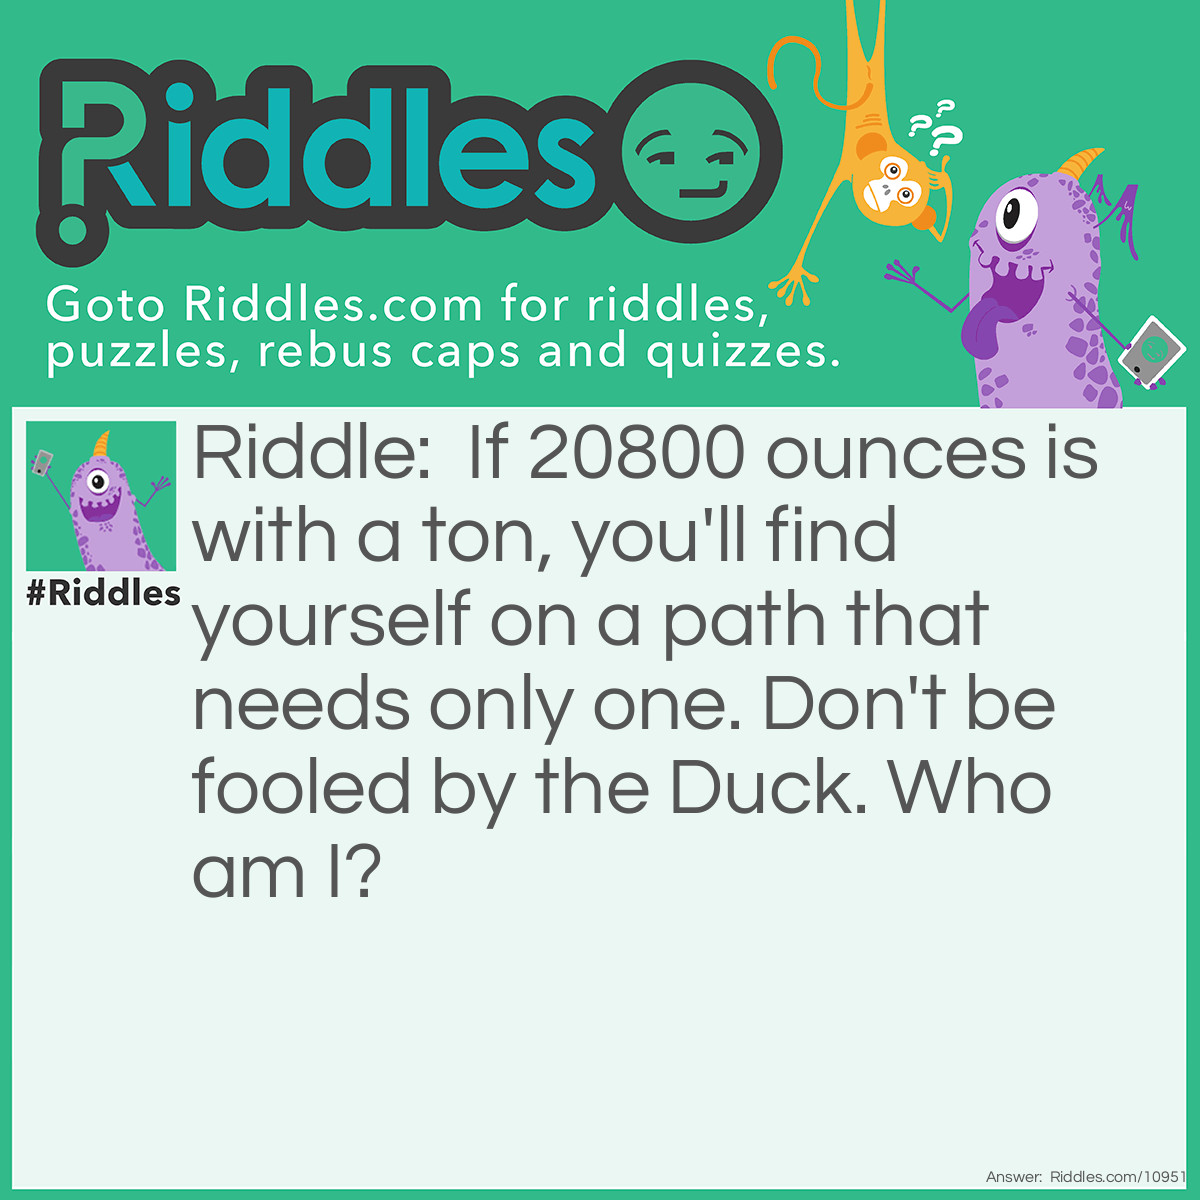 Riddle: If 20800 ounces is with a ton, you'll find yourself on a path that needs only one. Don't be fooled by the Duck. Who am I? Answer: Unanswered